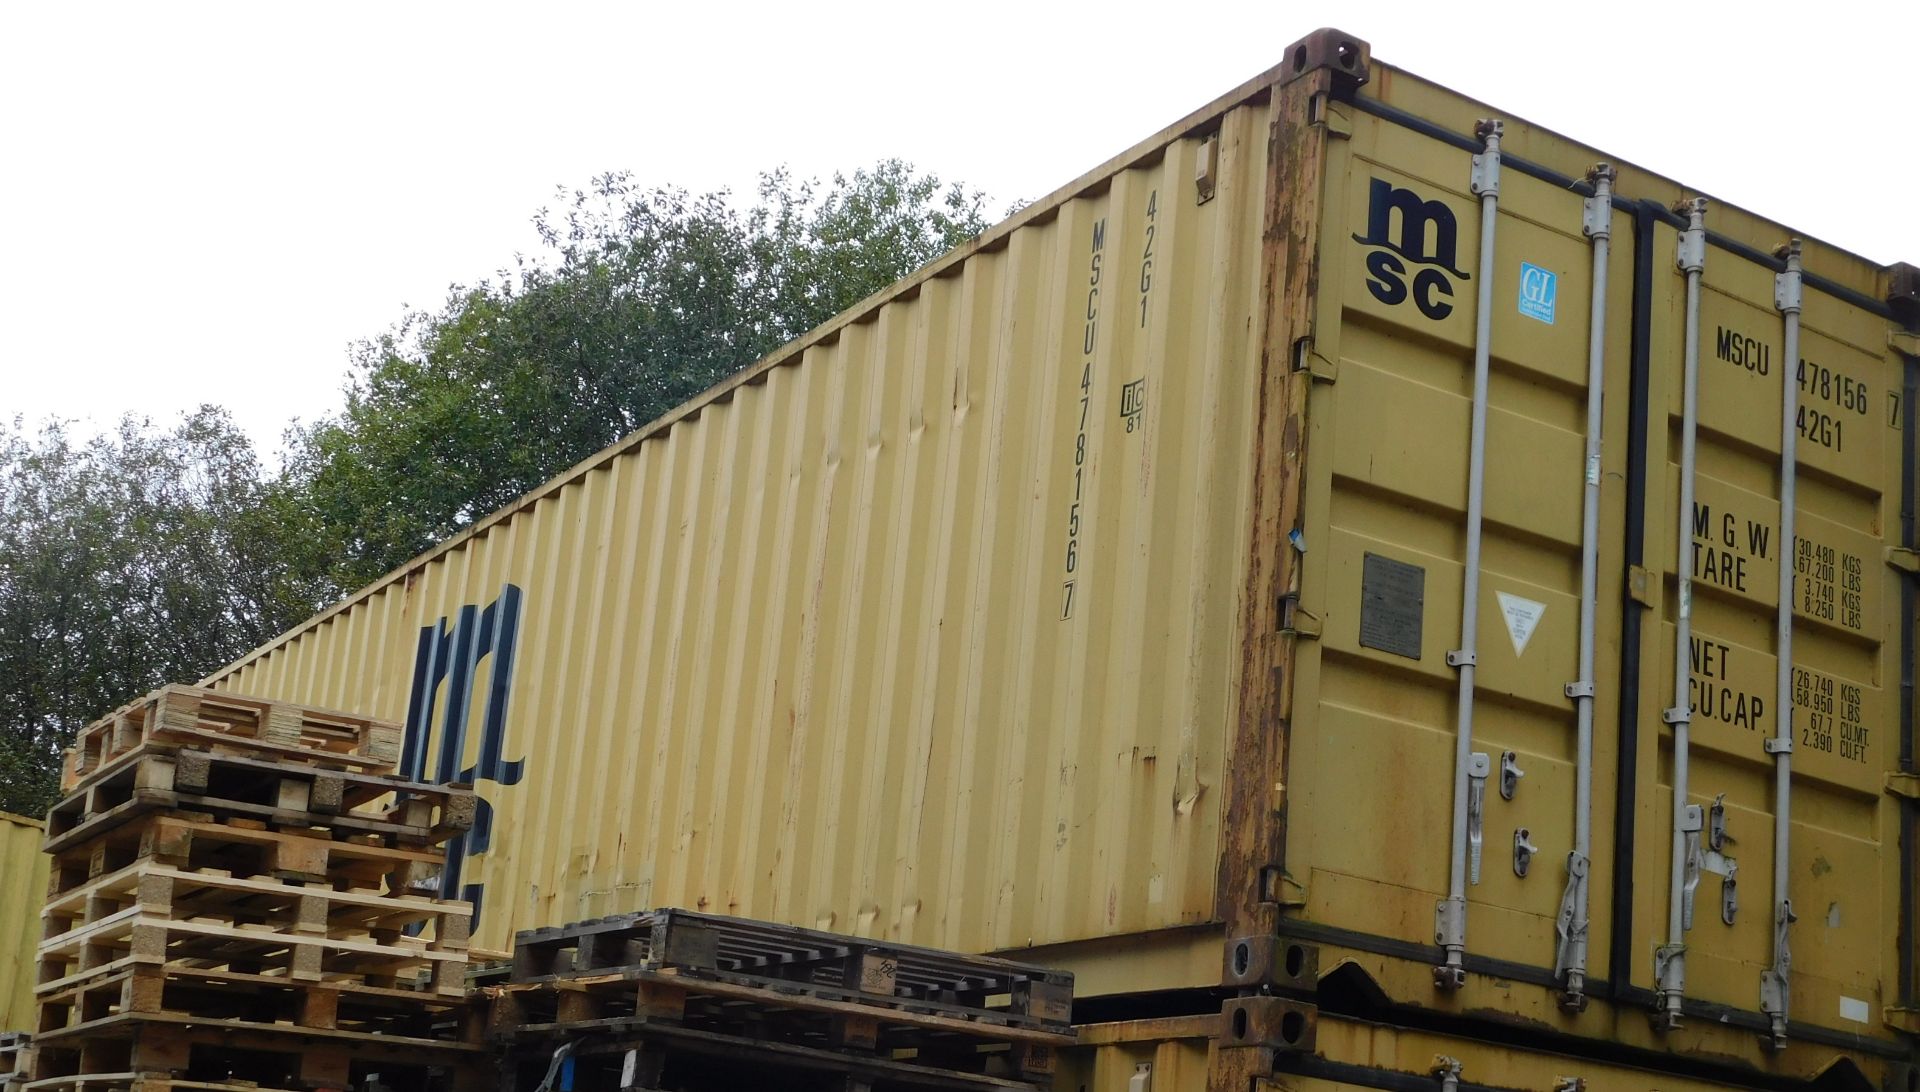 40ft Shipping Container (Must be Collected Wednesday 25th or Thursday 26th October) (Location